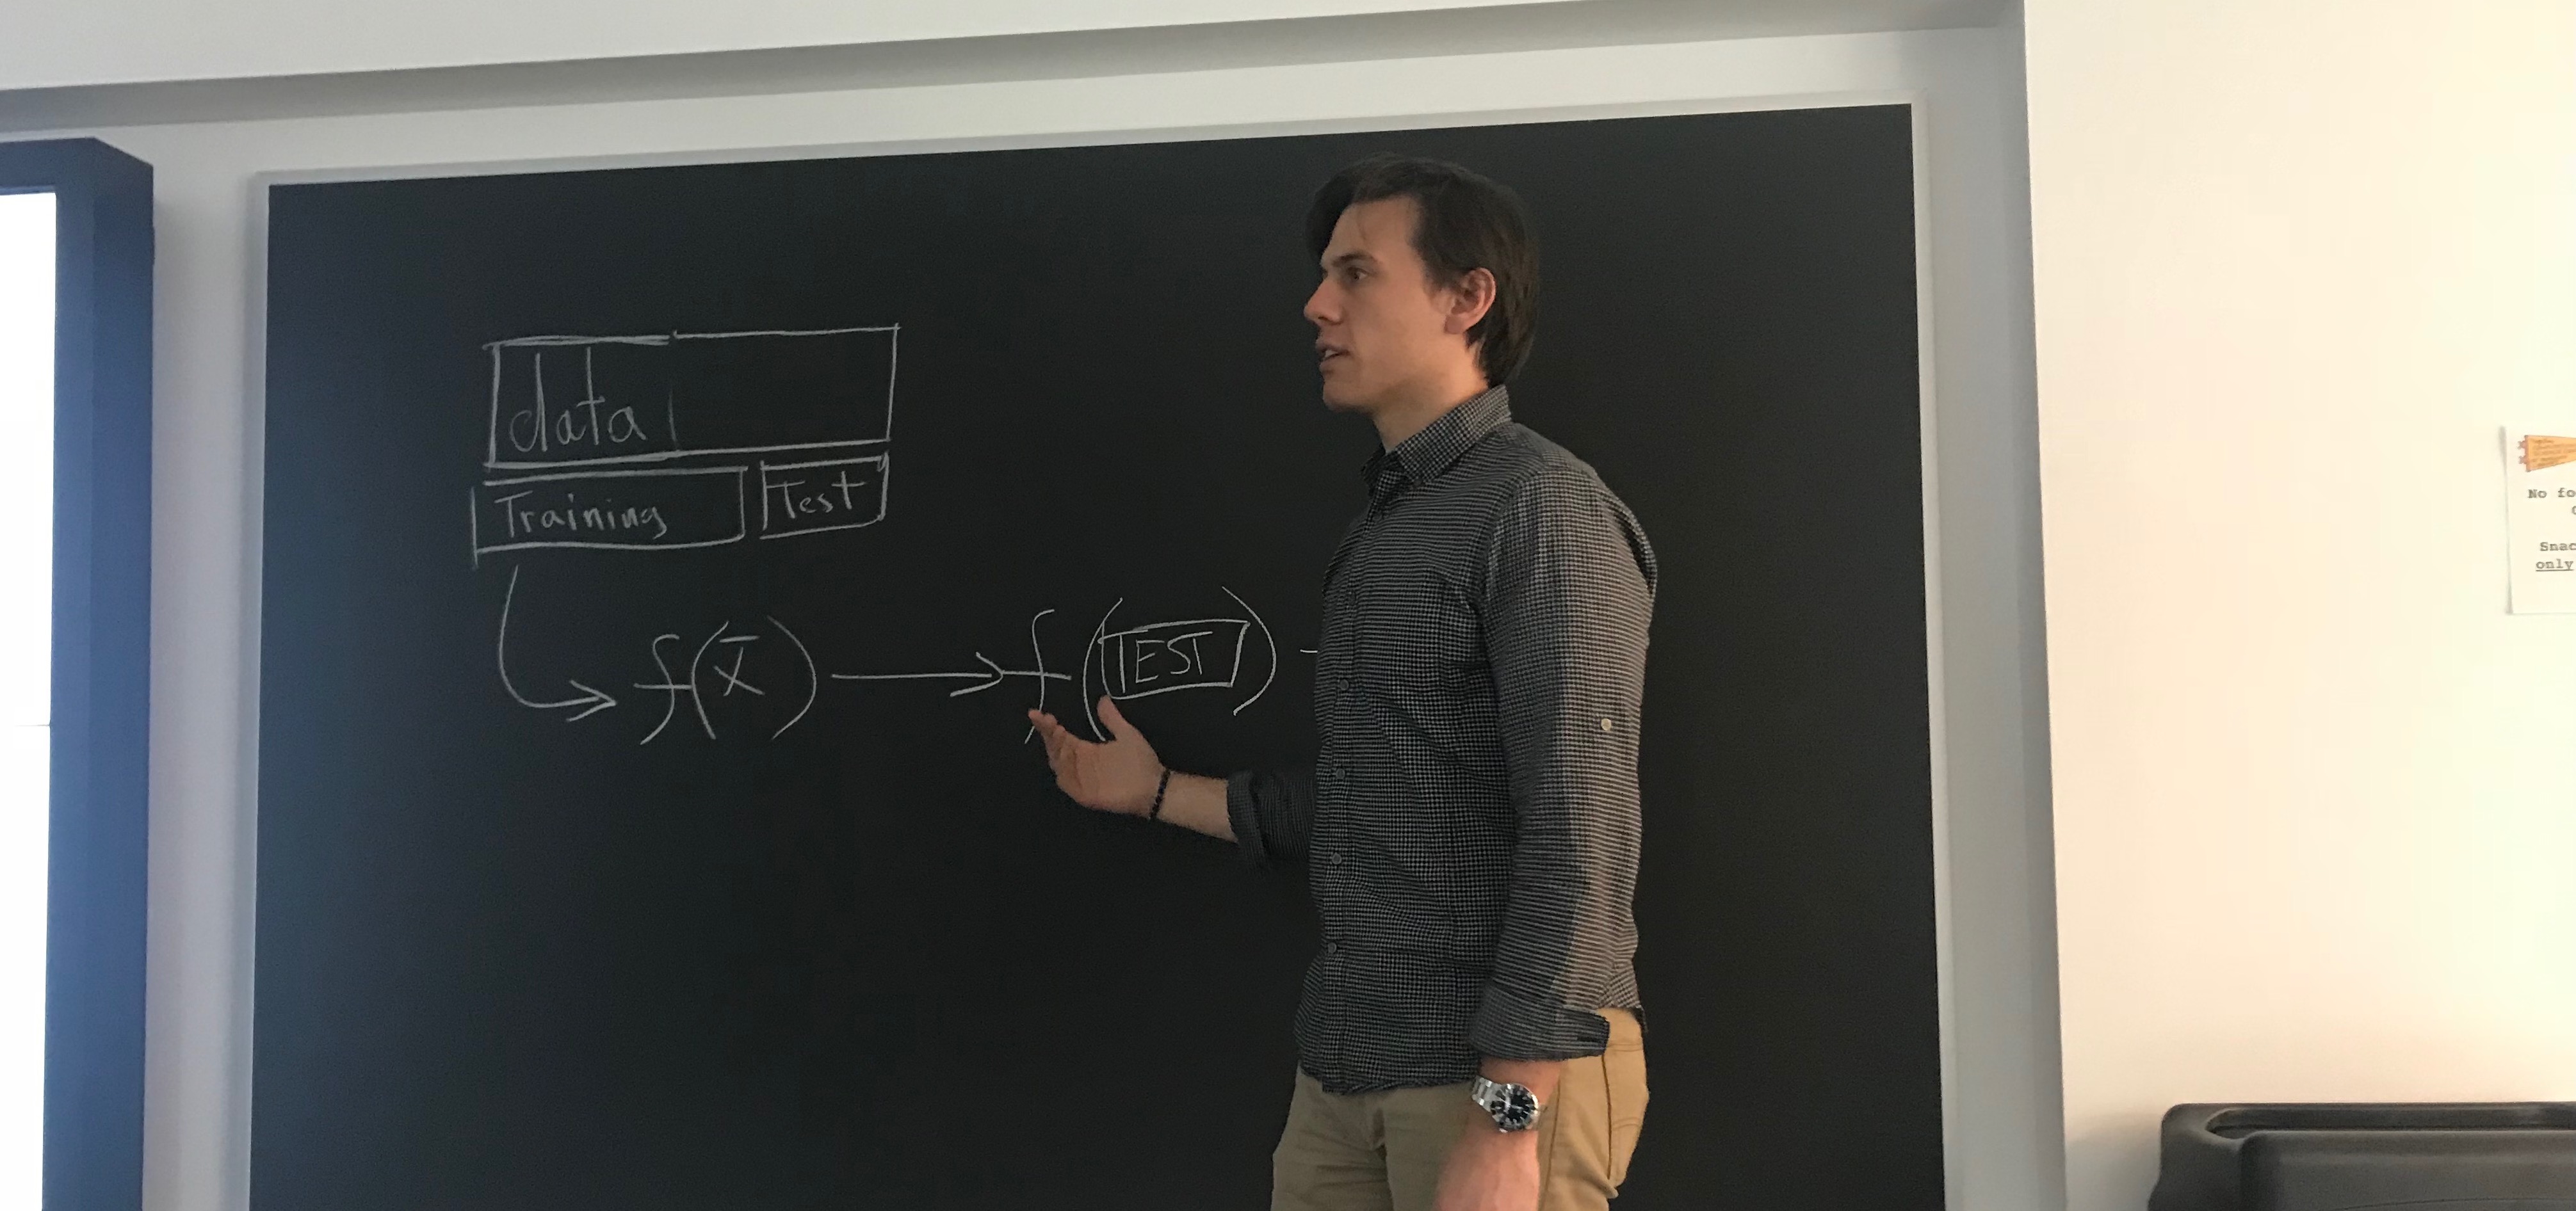 person teaching in front of blackboard, with a data-related diagram on it